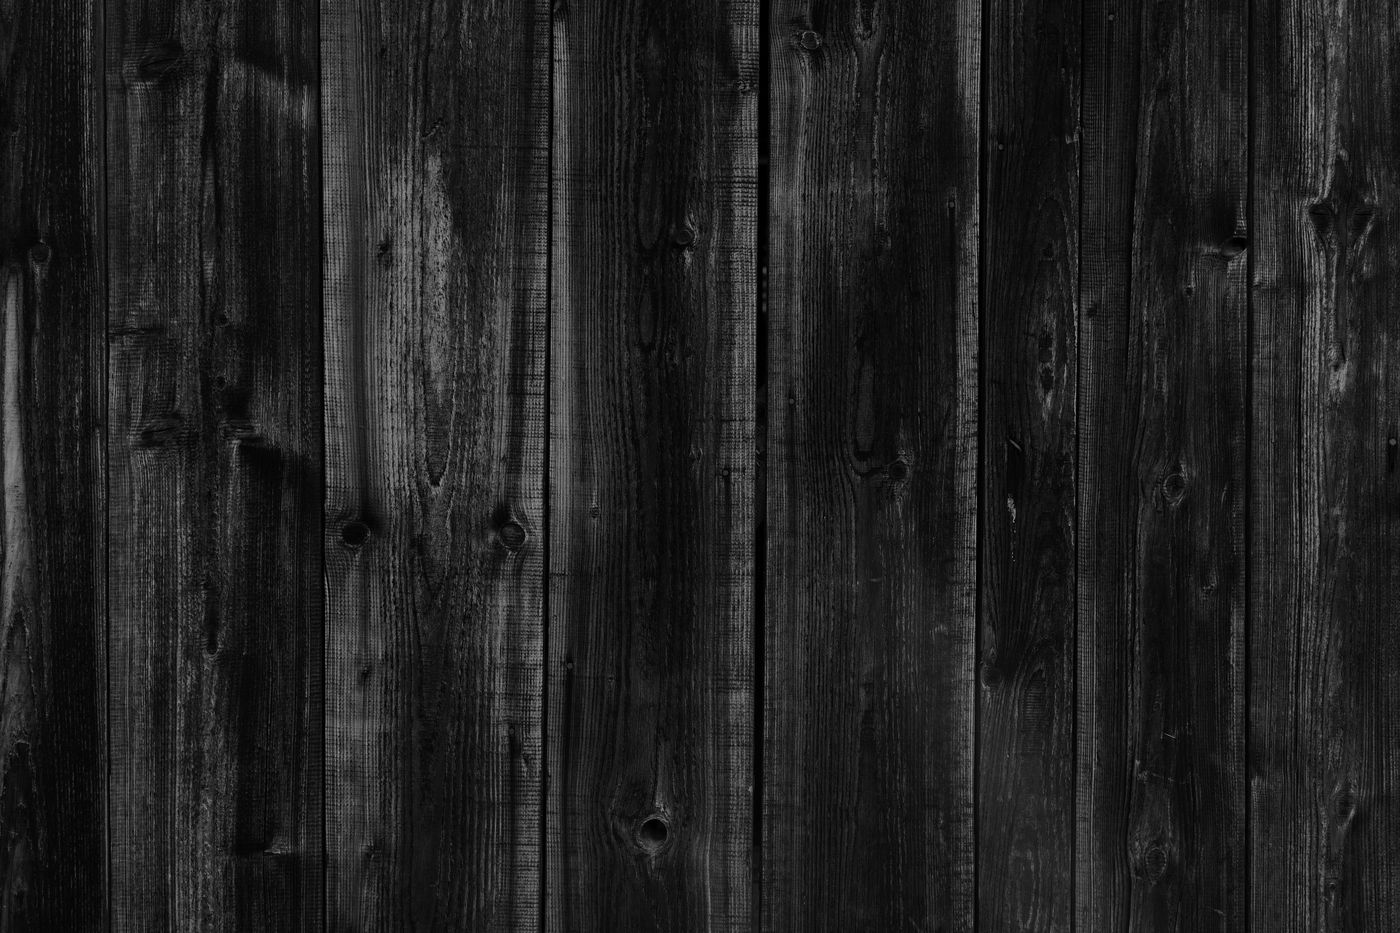 30 Black Wood Background Textures By Textures & Overlays Store